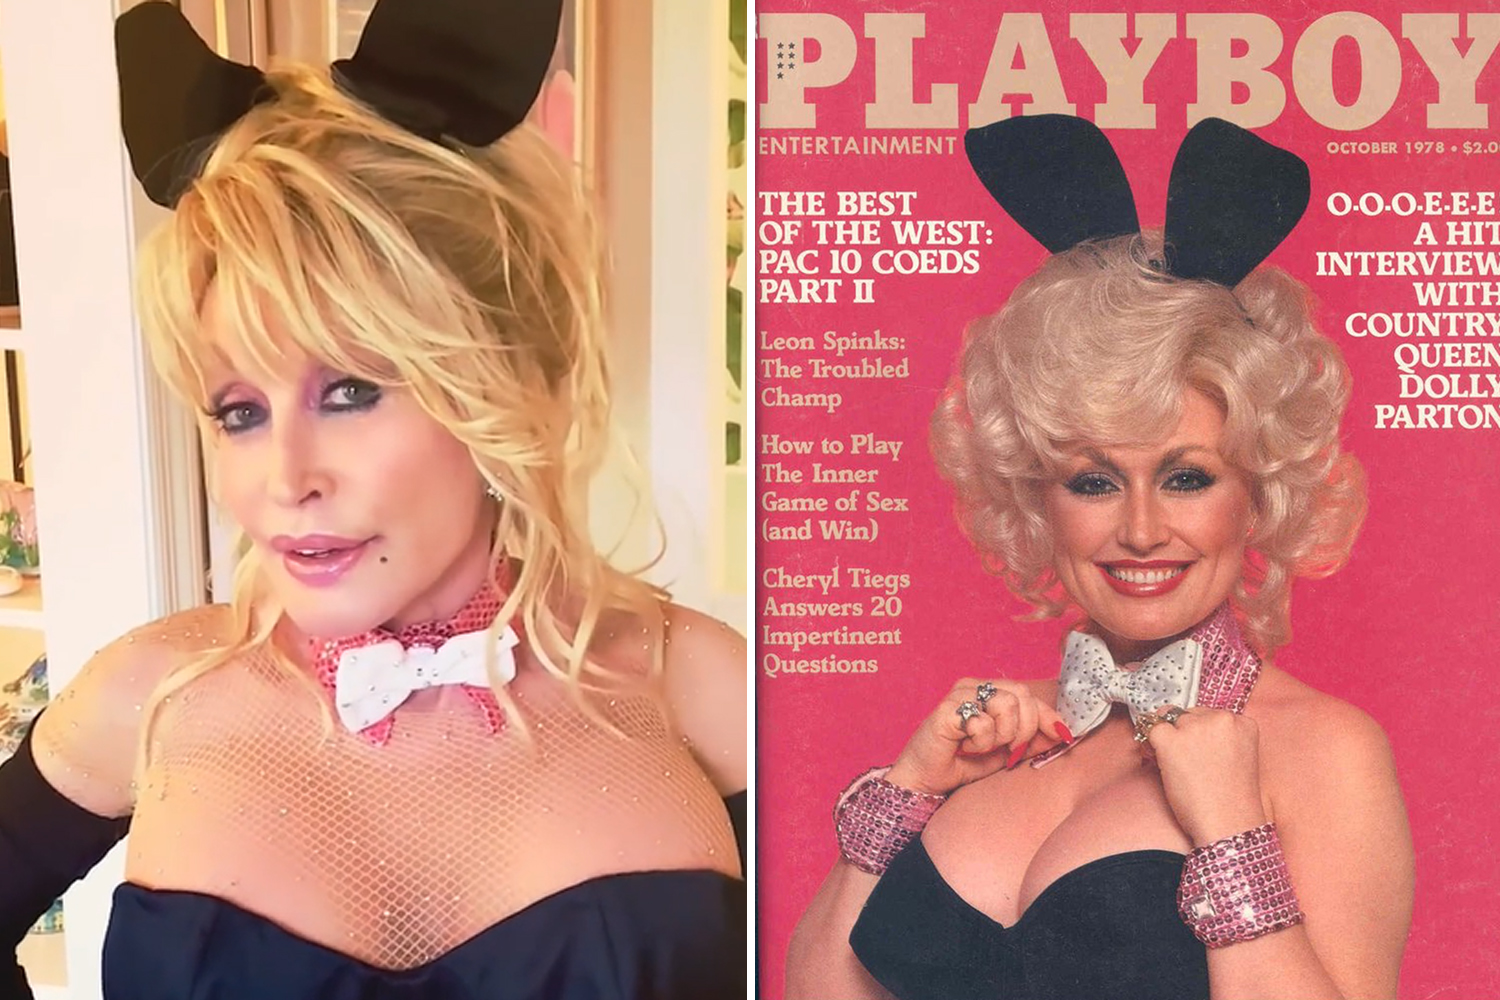 andre herman recommends dolly parton sexy pic